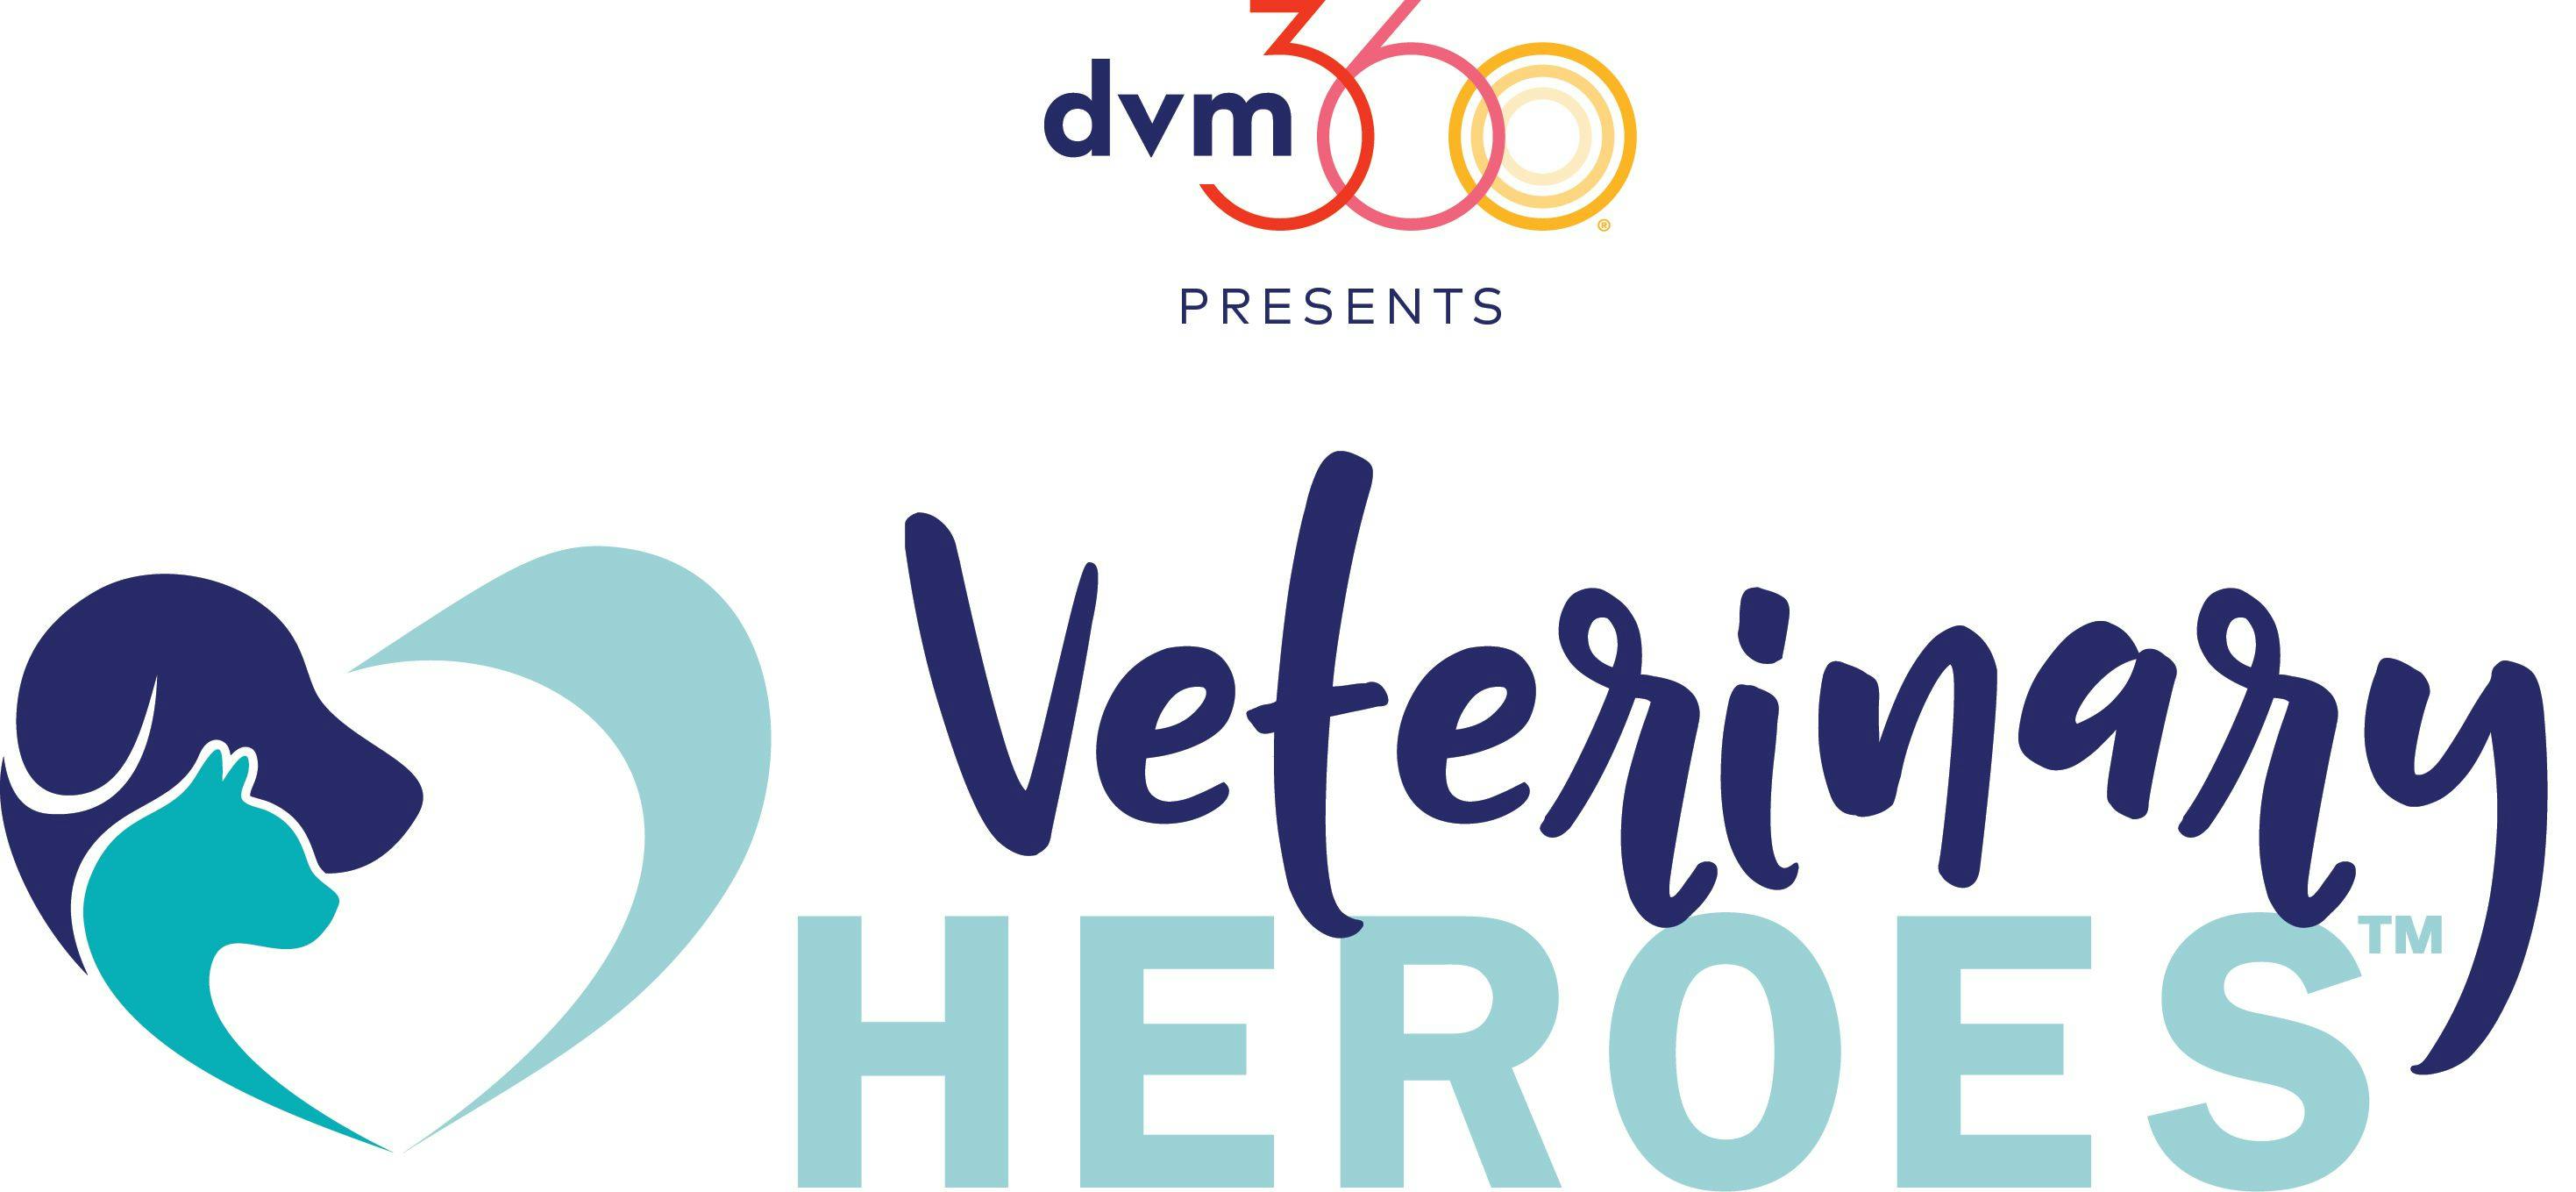 dvm360® announces winners of second annual Veterinary Heroes™ recognition program